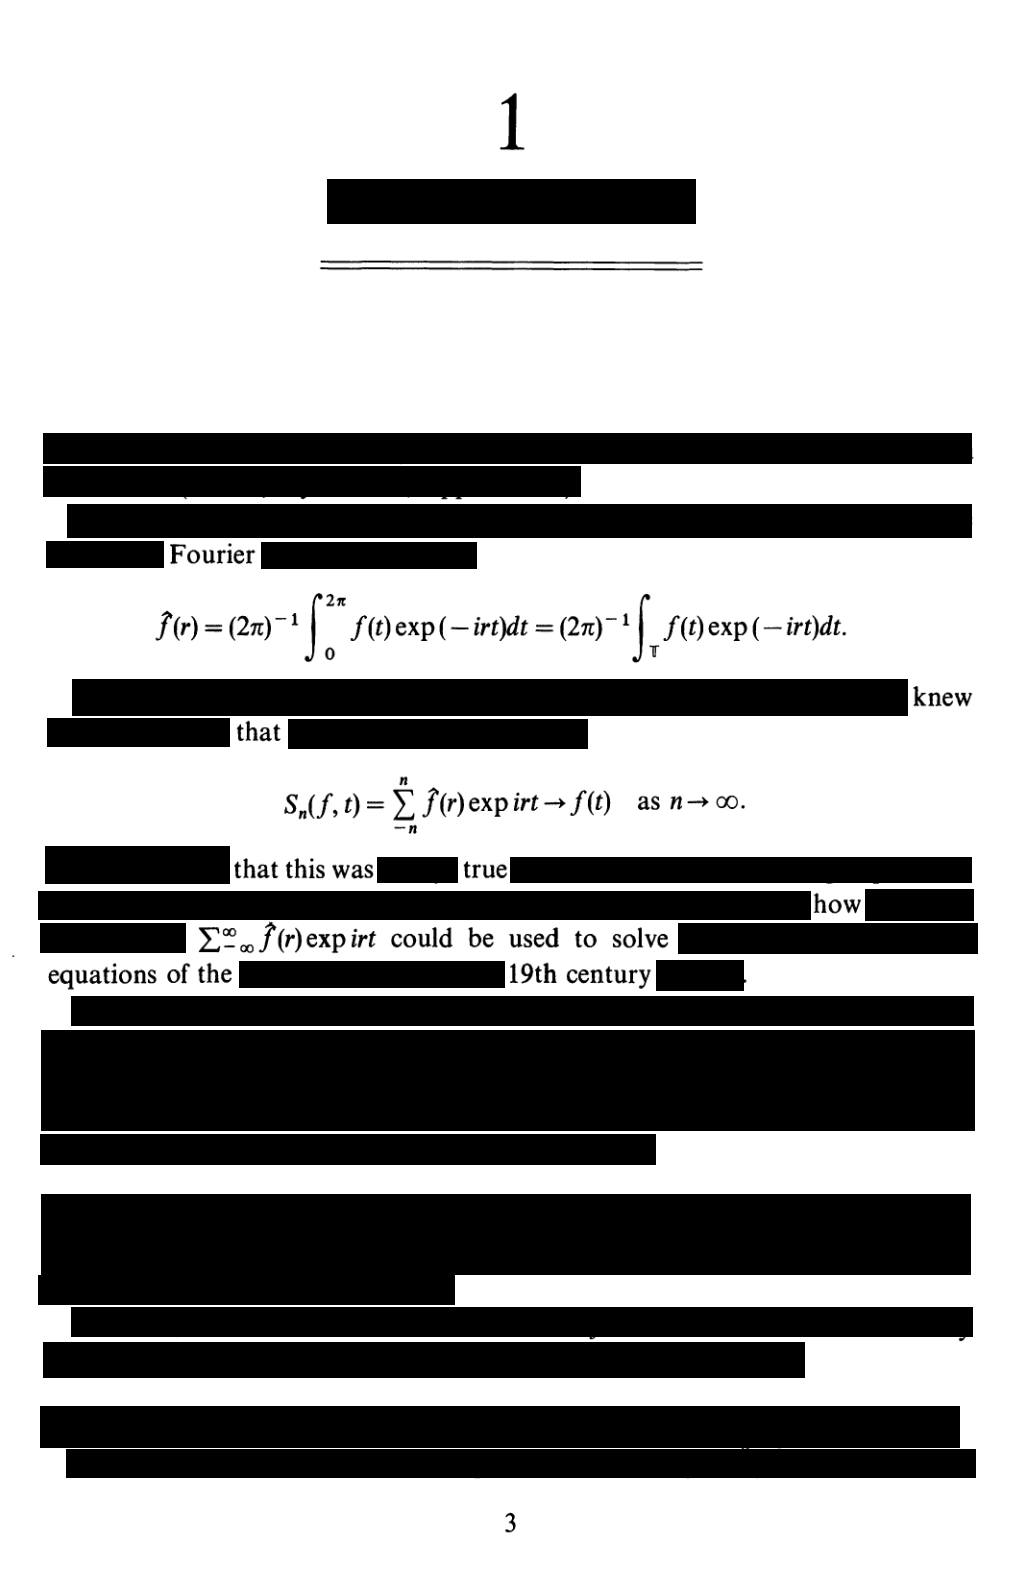 An erasure poem entitled 'Fourier Knew' using the book 'Fourier Analysis' by T. W. Korner